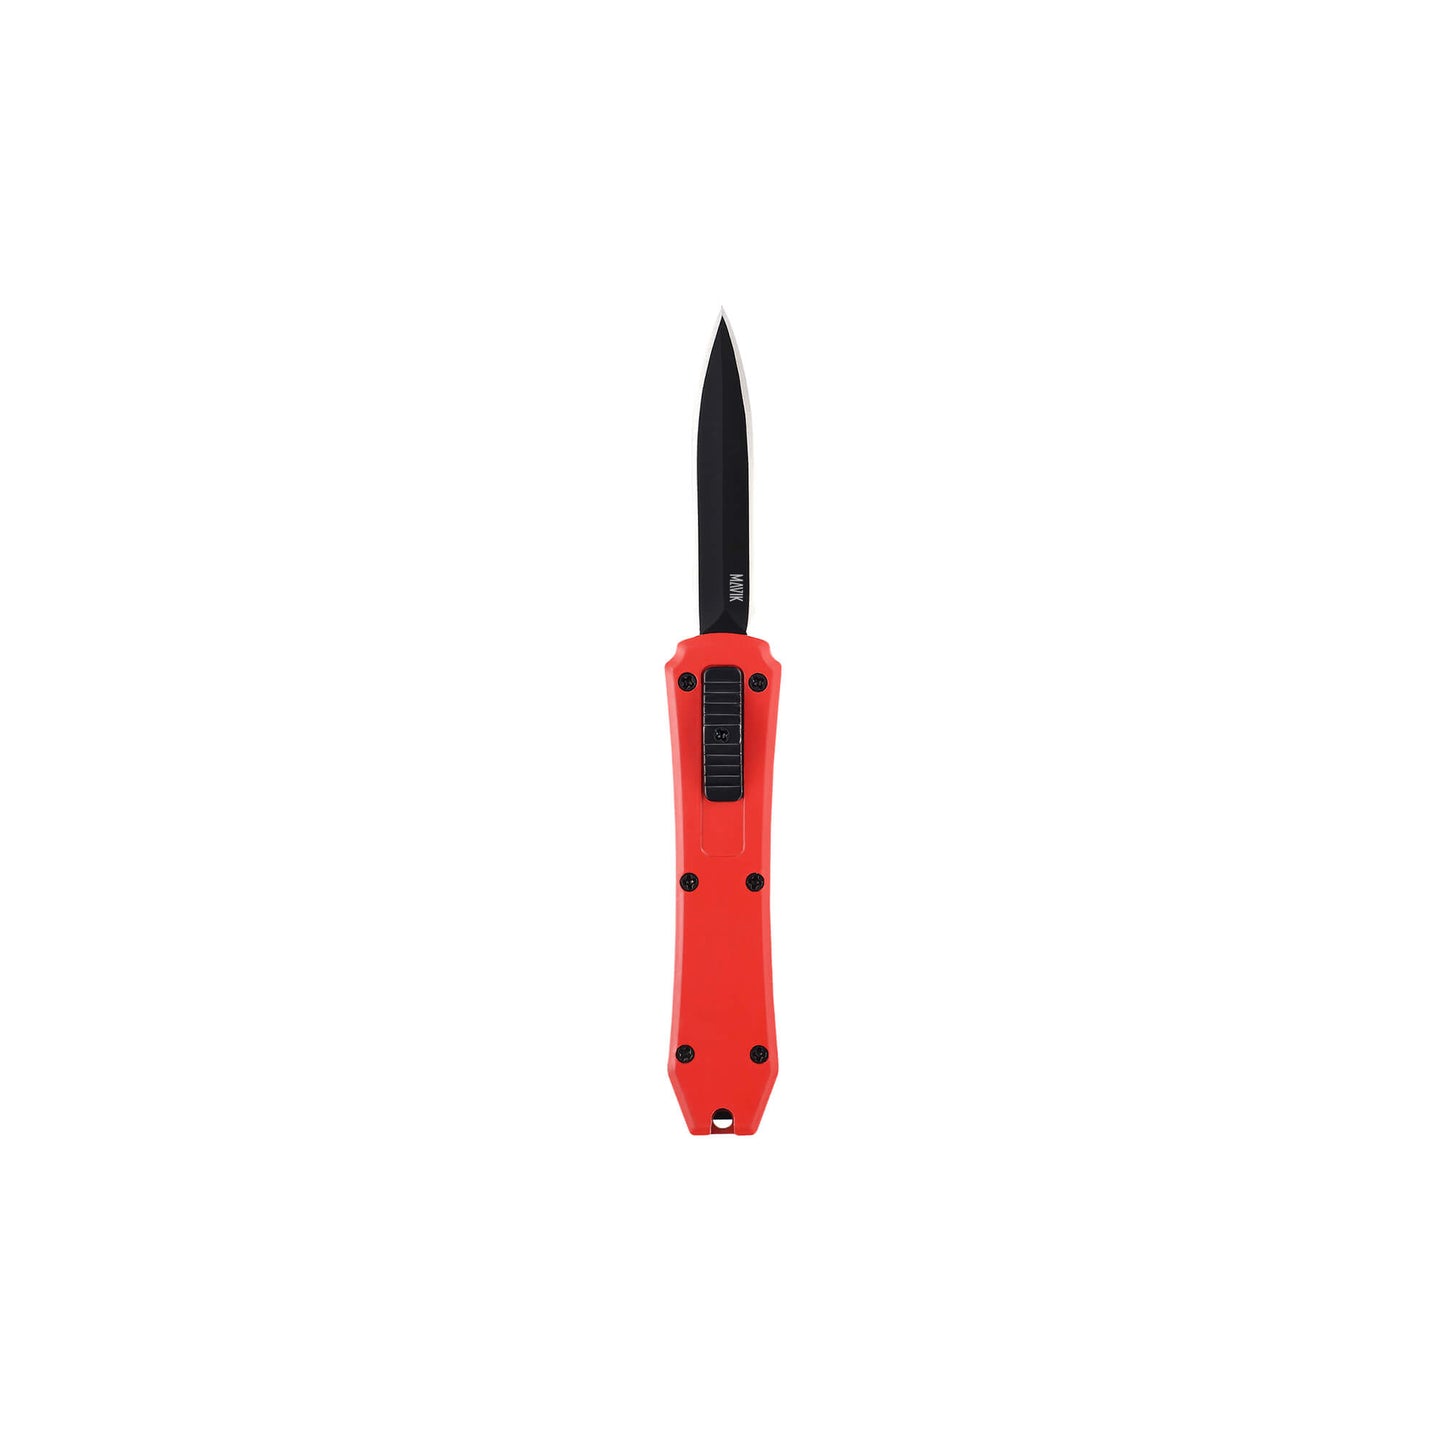 Red Hunting, fishing, EDC Mini automatic OTF knife Xkarve with spear point blade, Zinc alloy handle and lanyard hole.